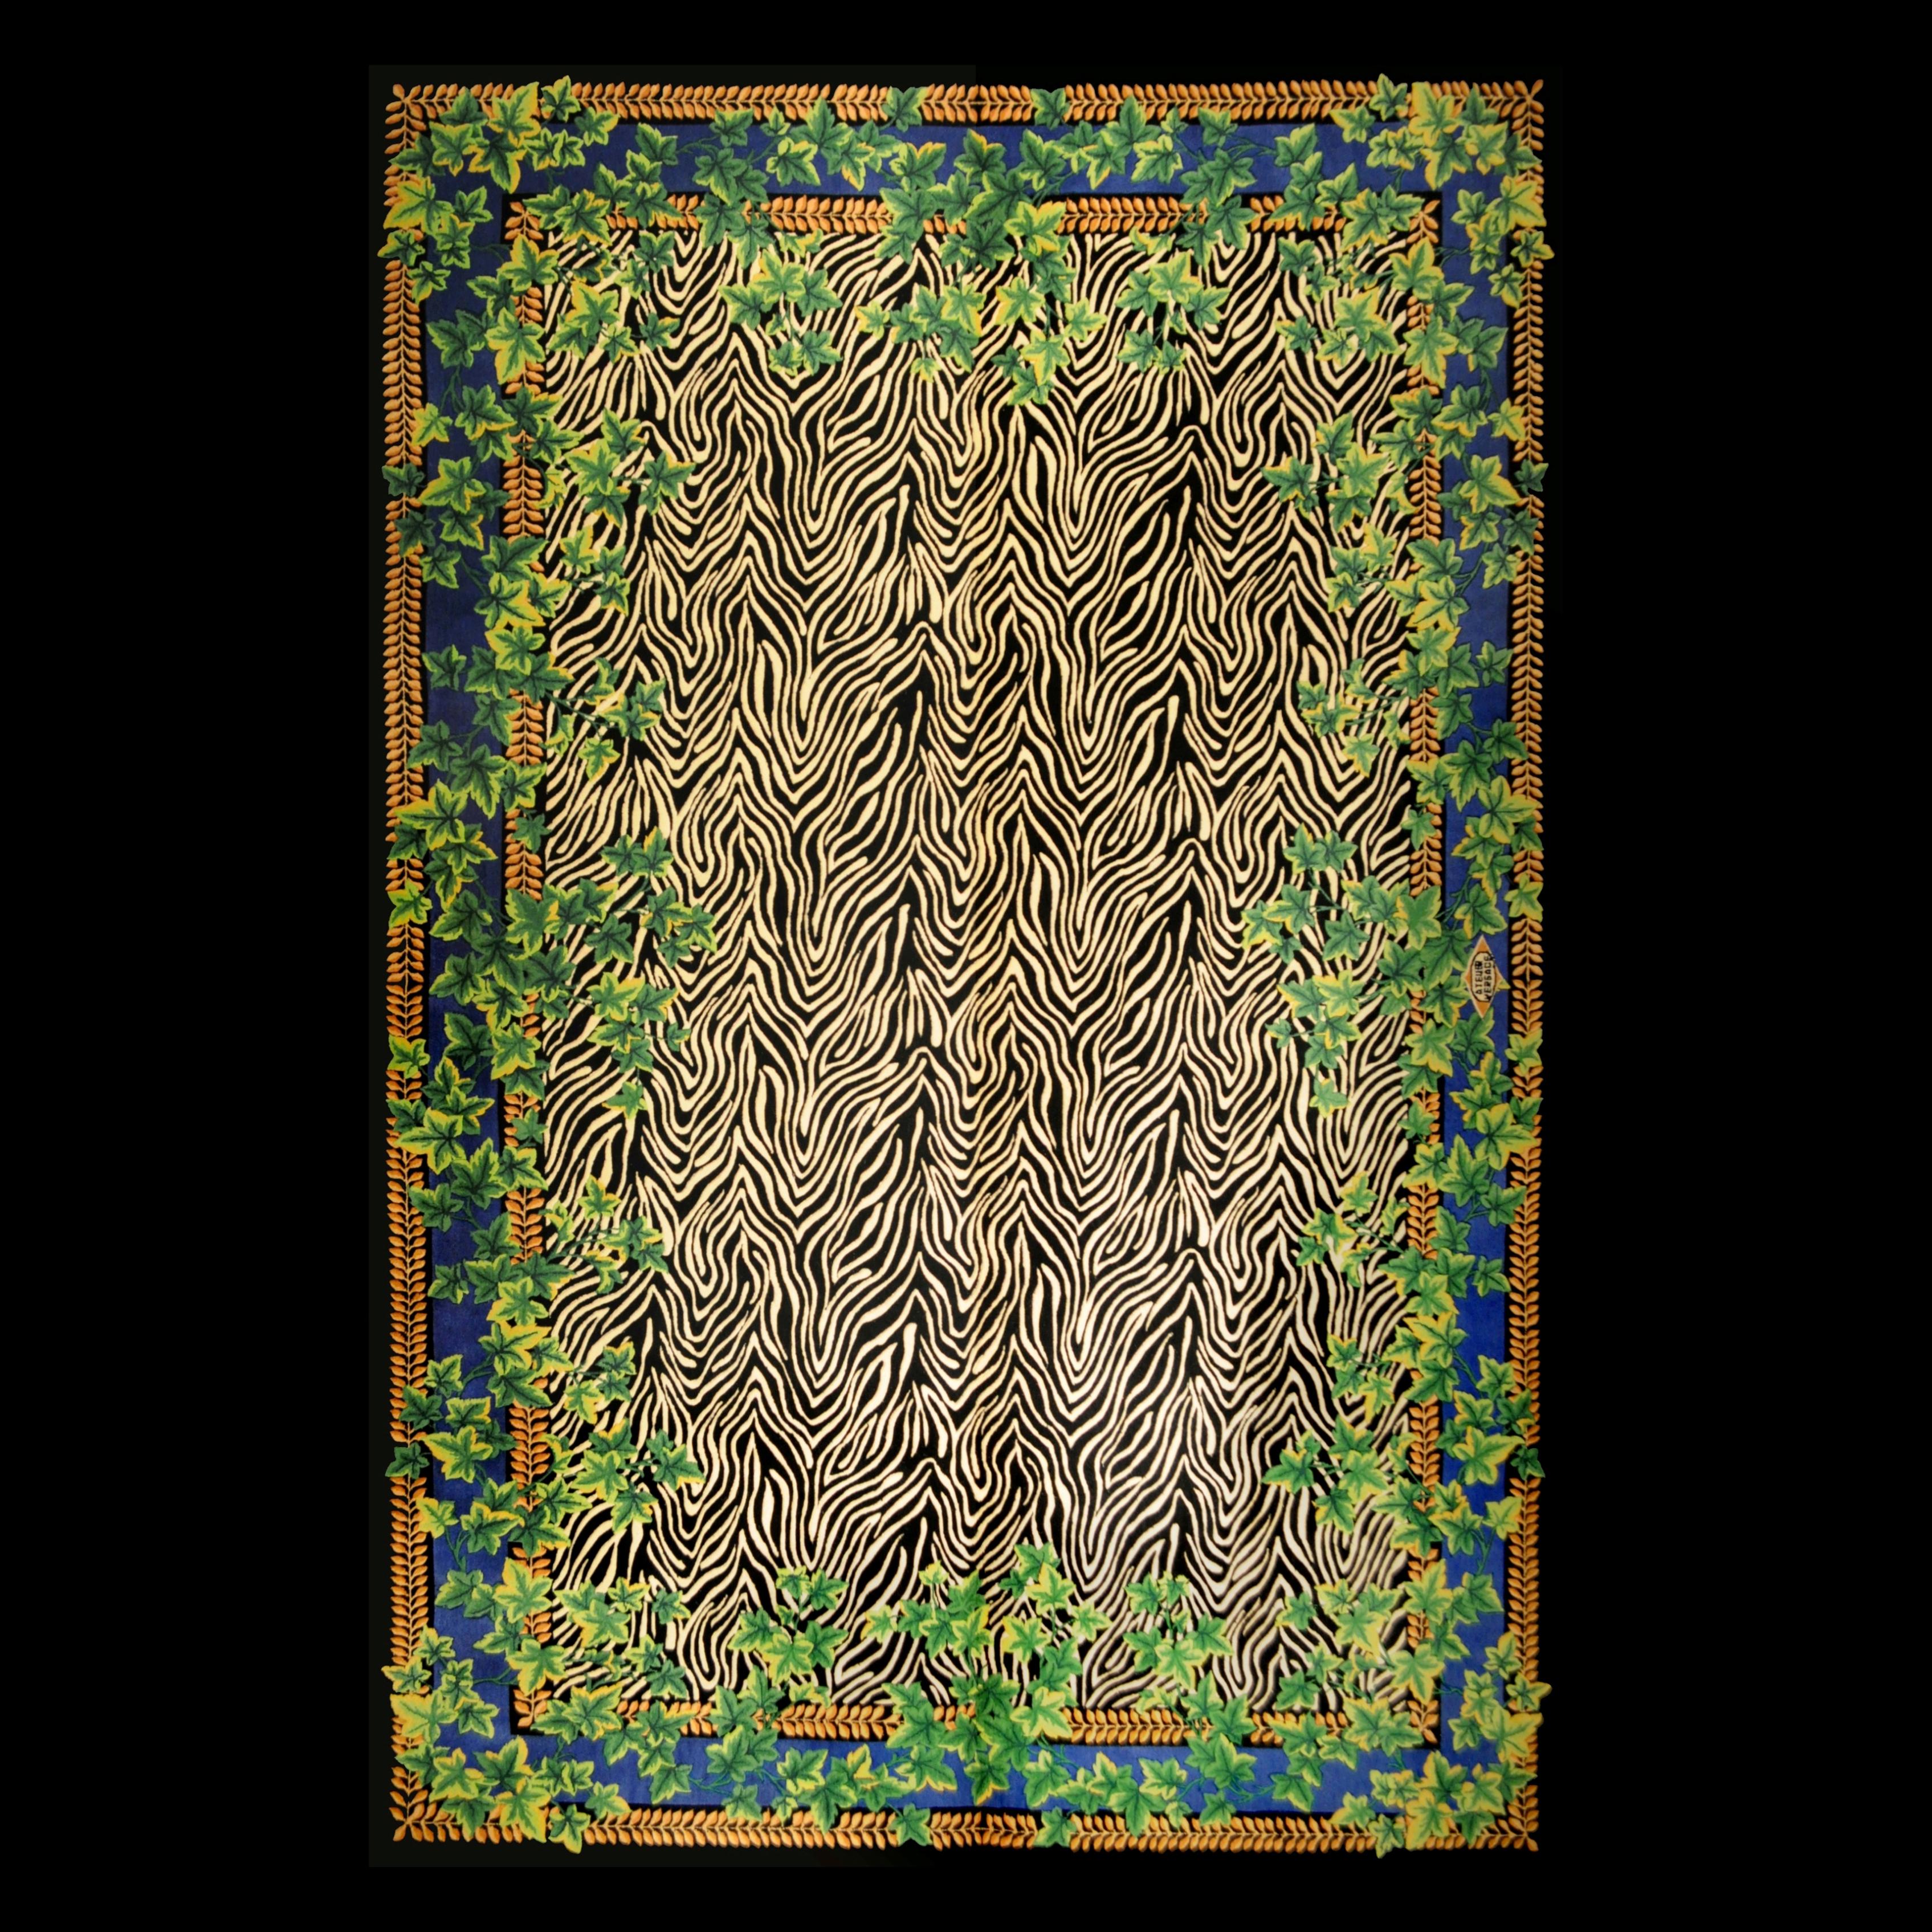 Gianni Versace collection rug wild ivy, gold zebra animal print, 1980

Rug designed and manufactured by Atelier Versace

Wild Ivy rug
Measures: 200 x 300

In good original condition, with minor wear consistent with age and use

A vintage